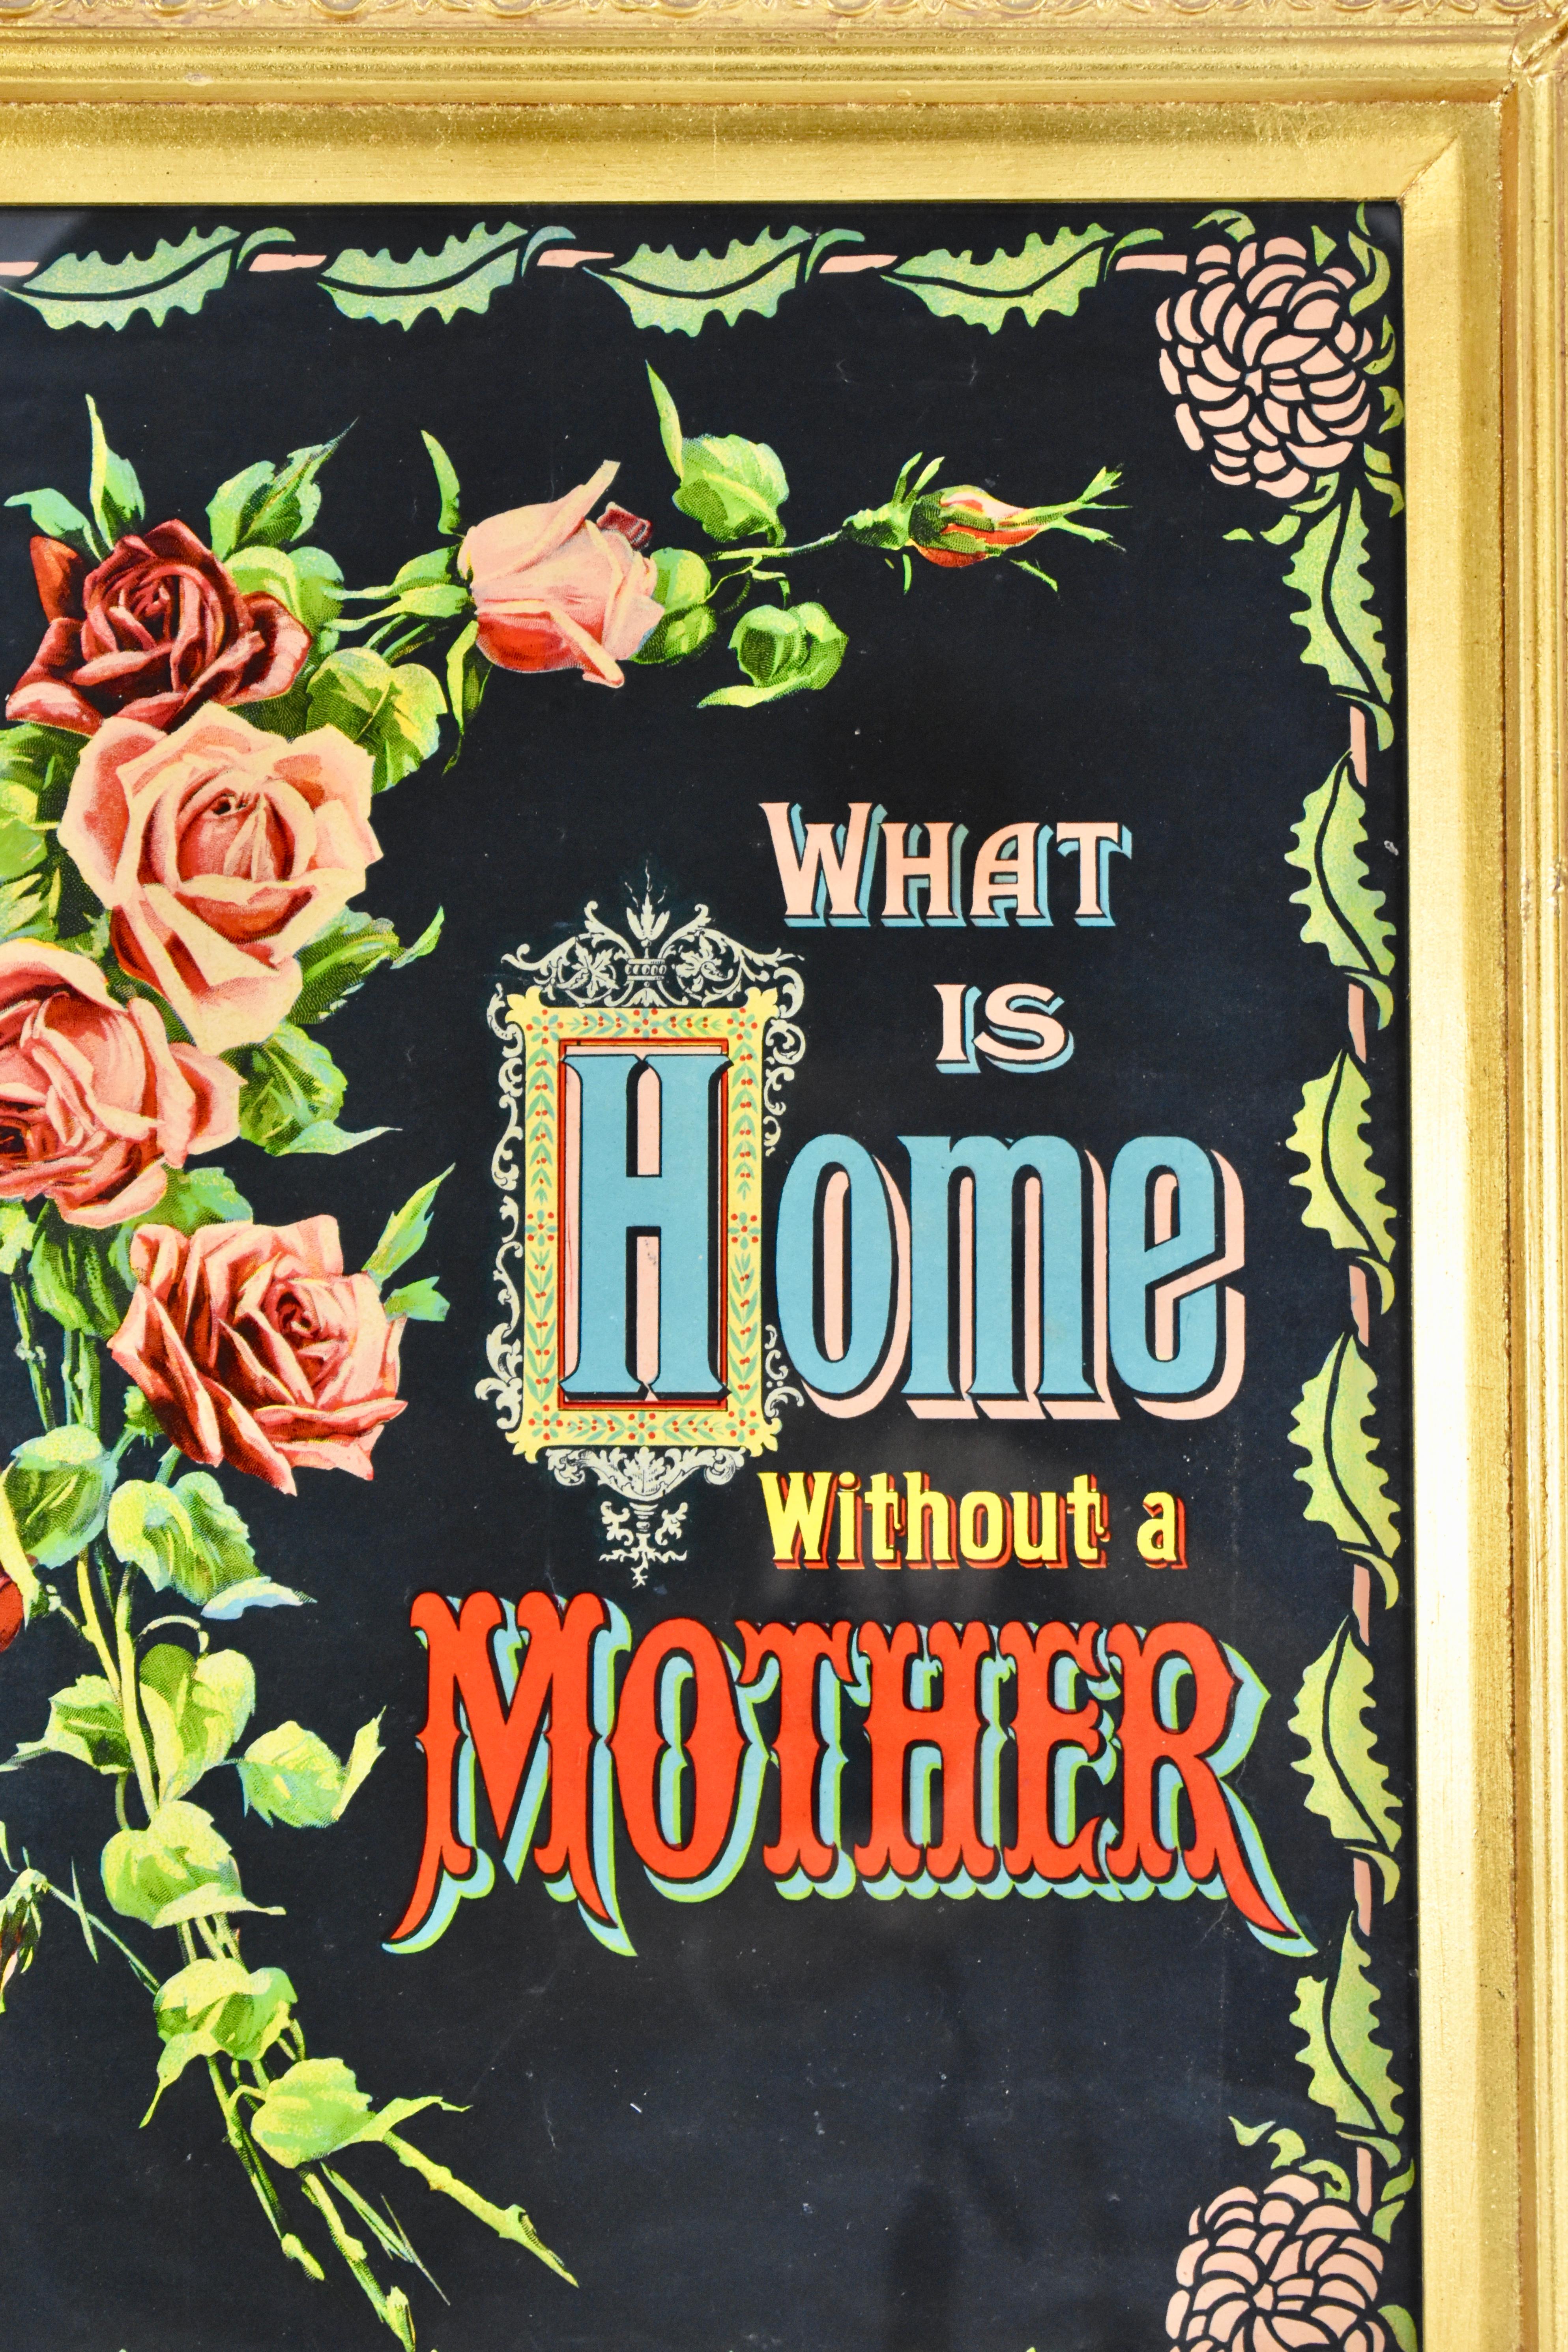 An original framed Victorian Era Chromolithograph motto print, circa late 1800s-early 1900s.

The phrase, “What is Home Without a Mother” is brightly printed on paper with a type face typical of the era. A spray of pink and red roses borders the